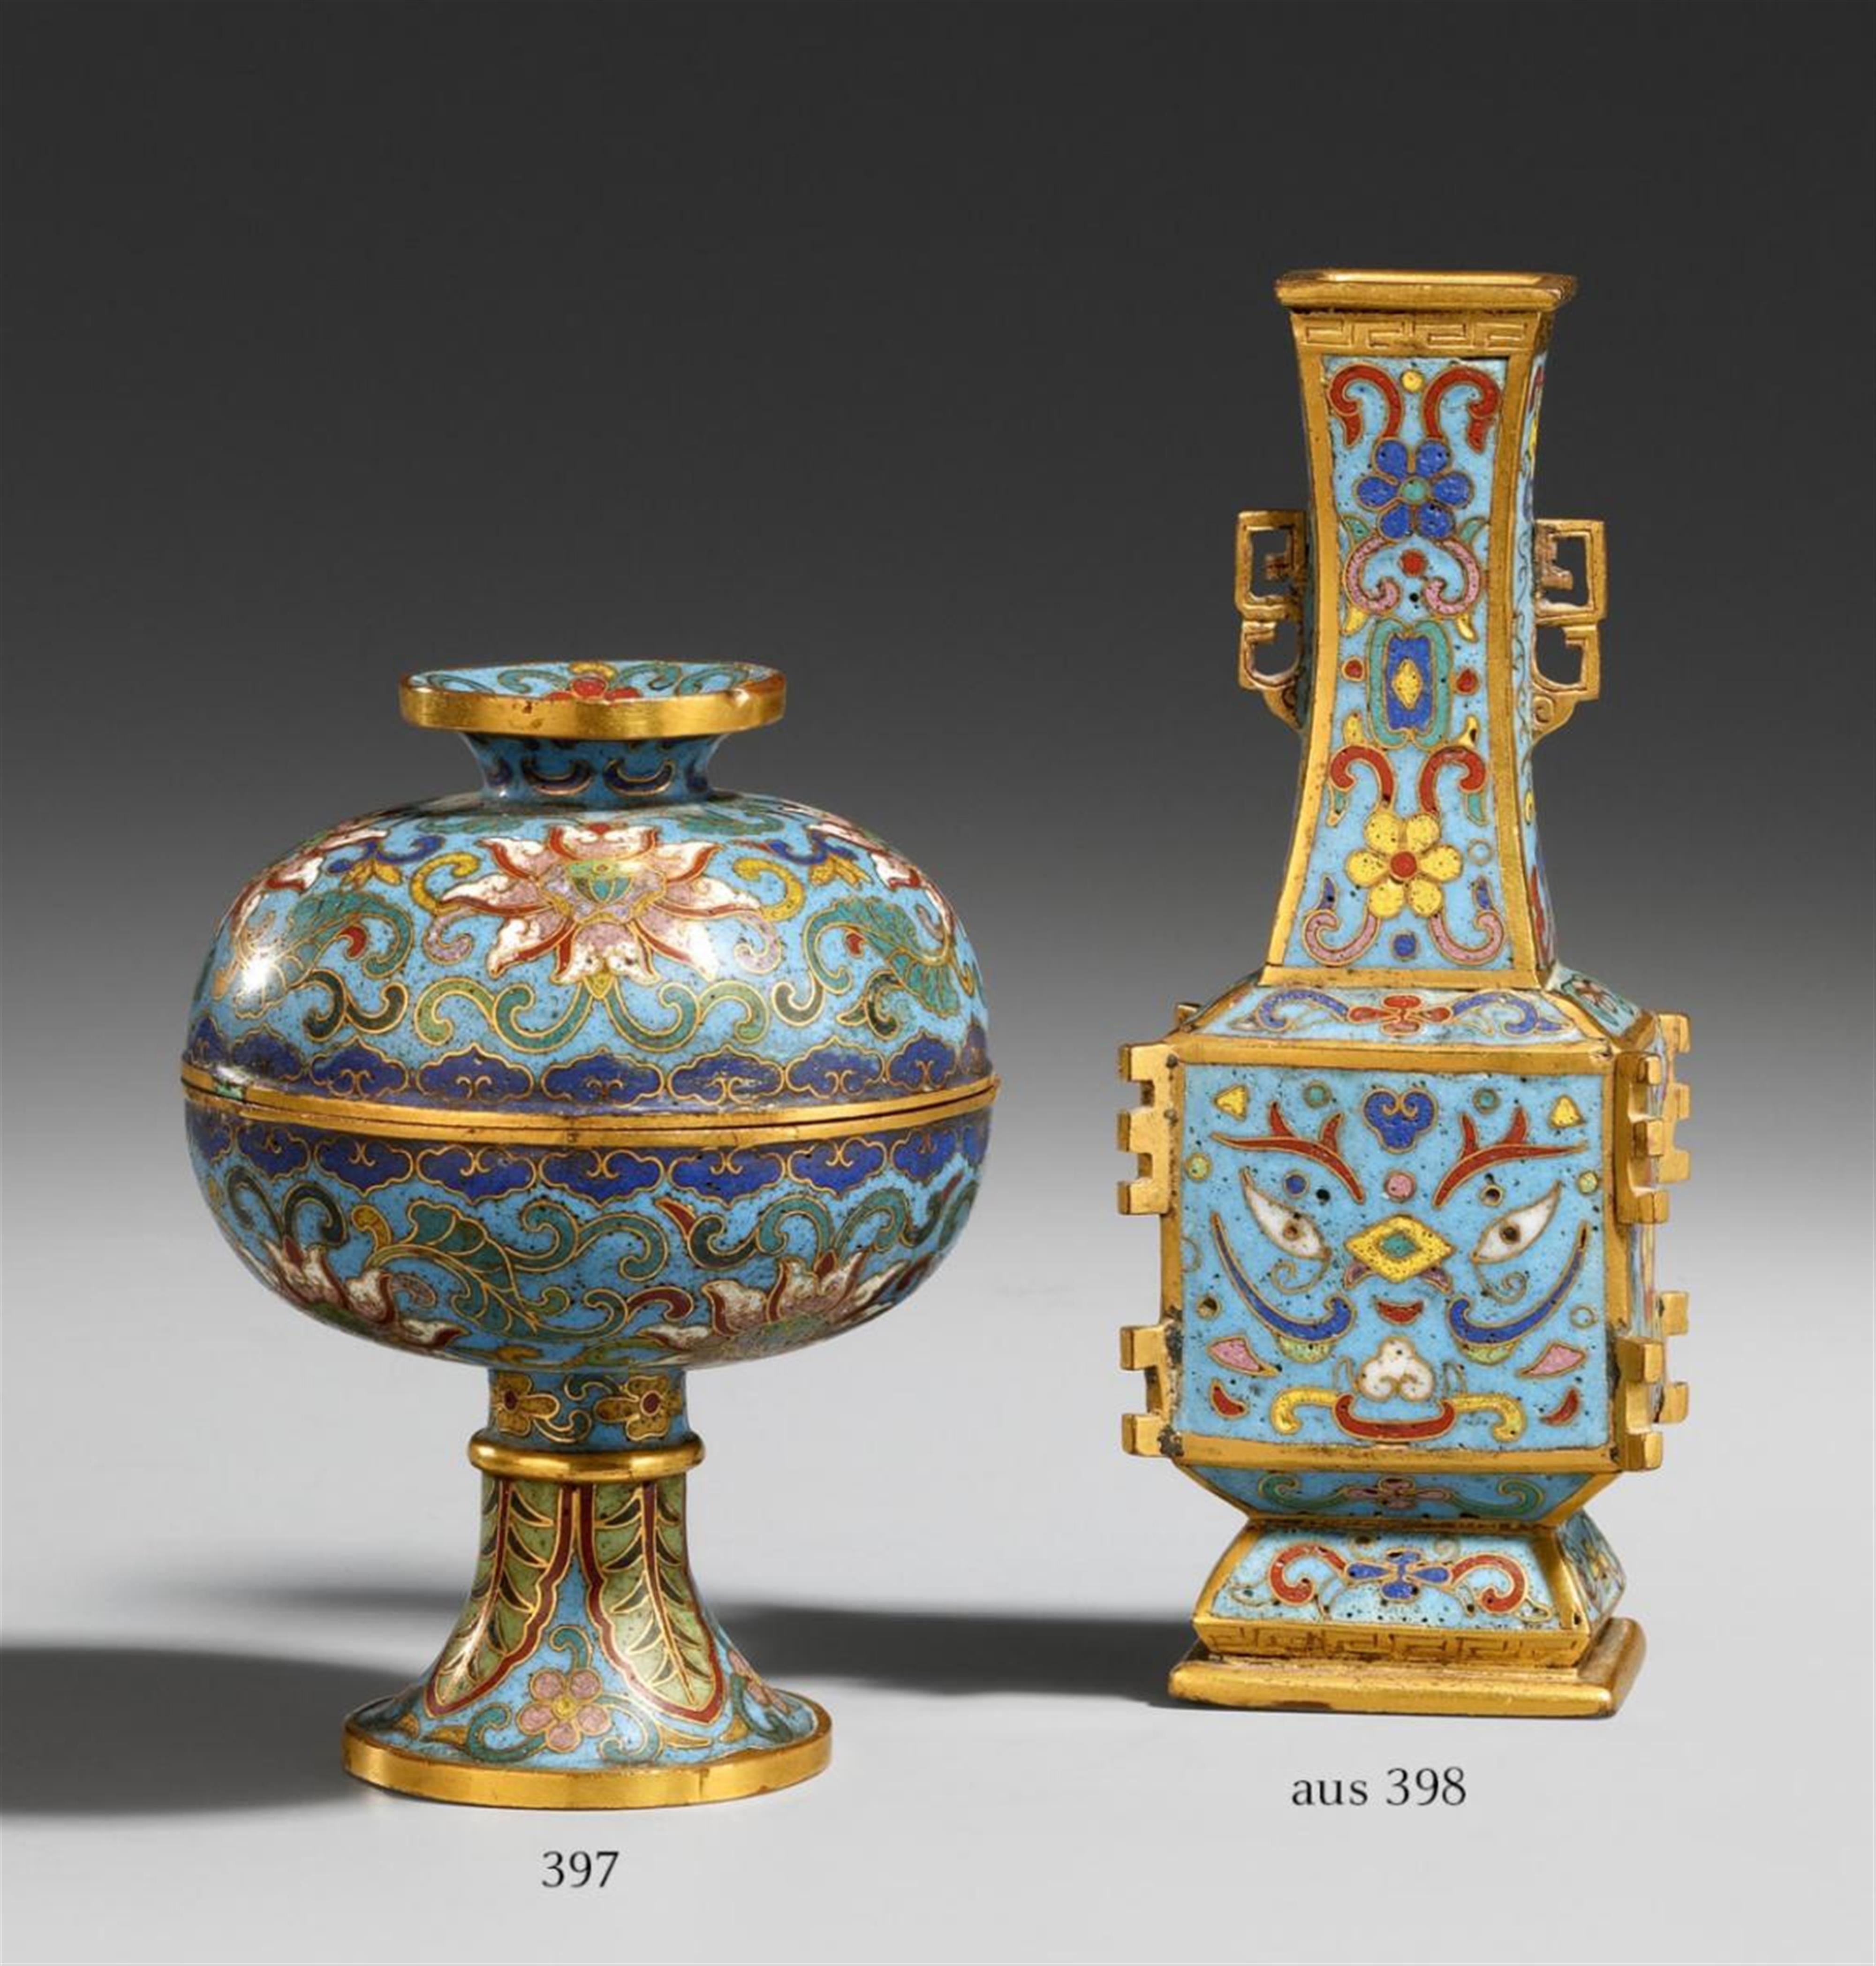 A small cloisonné enamel footed and lidded bowl. 18th century - image-1